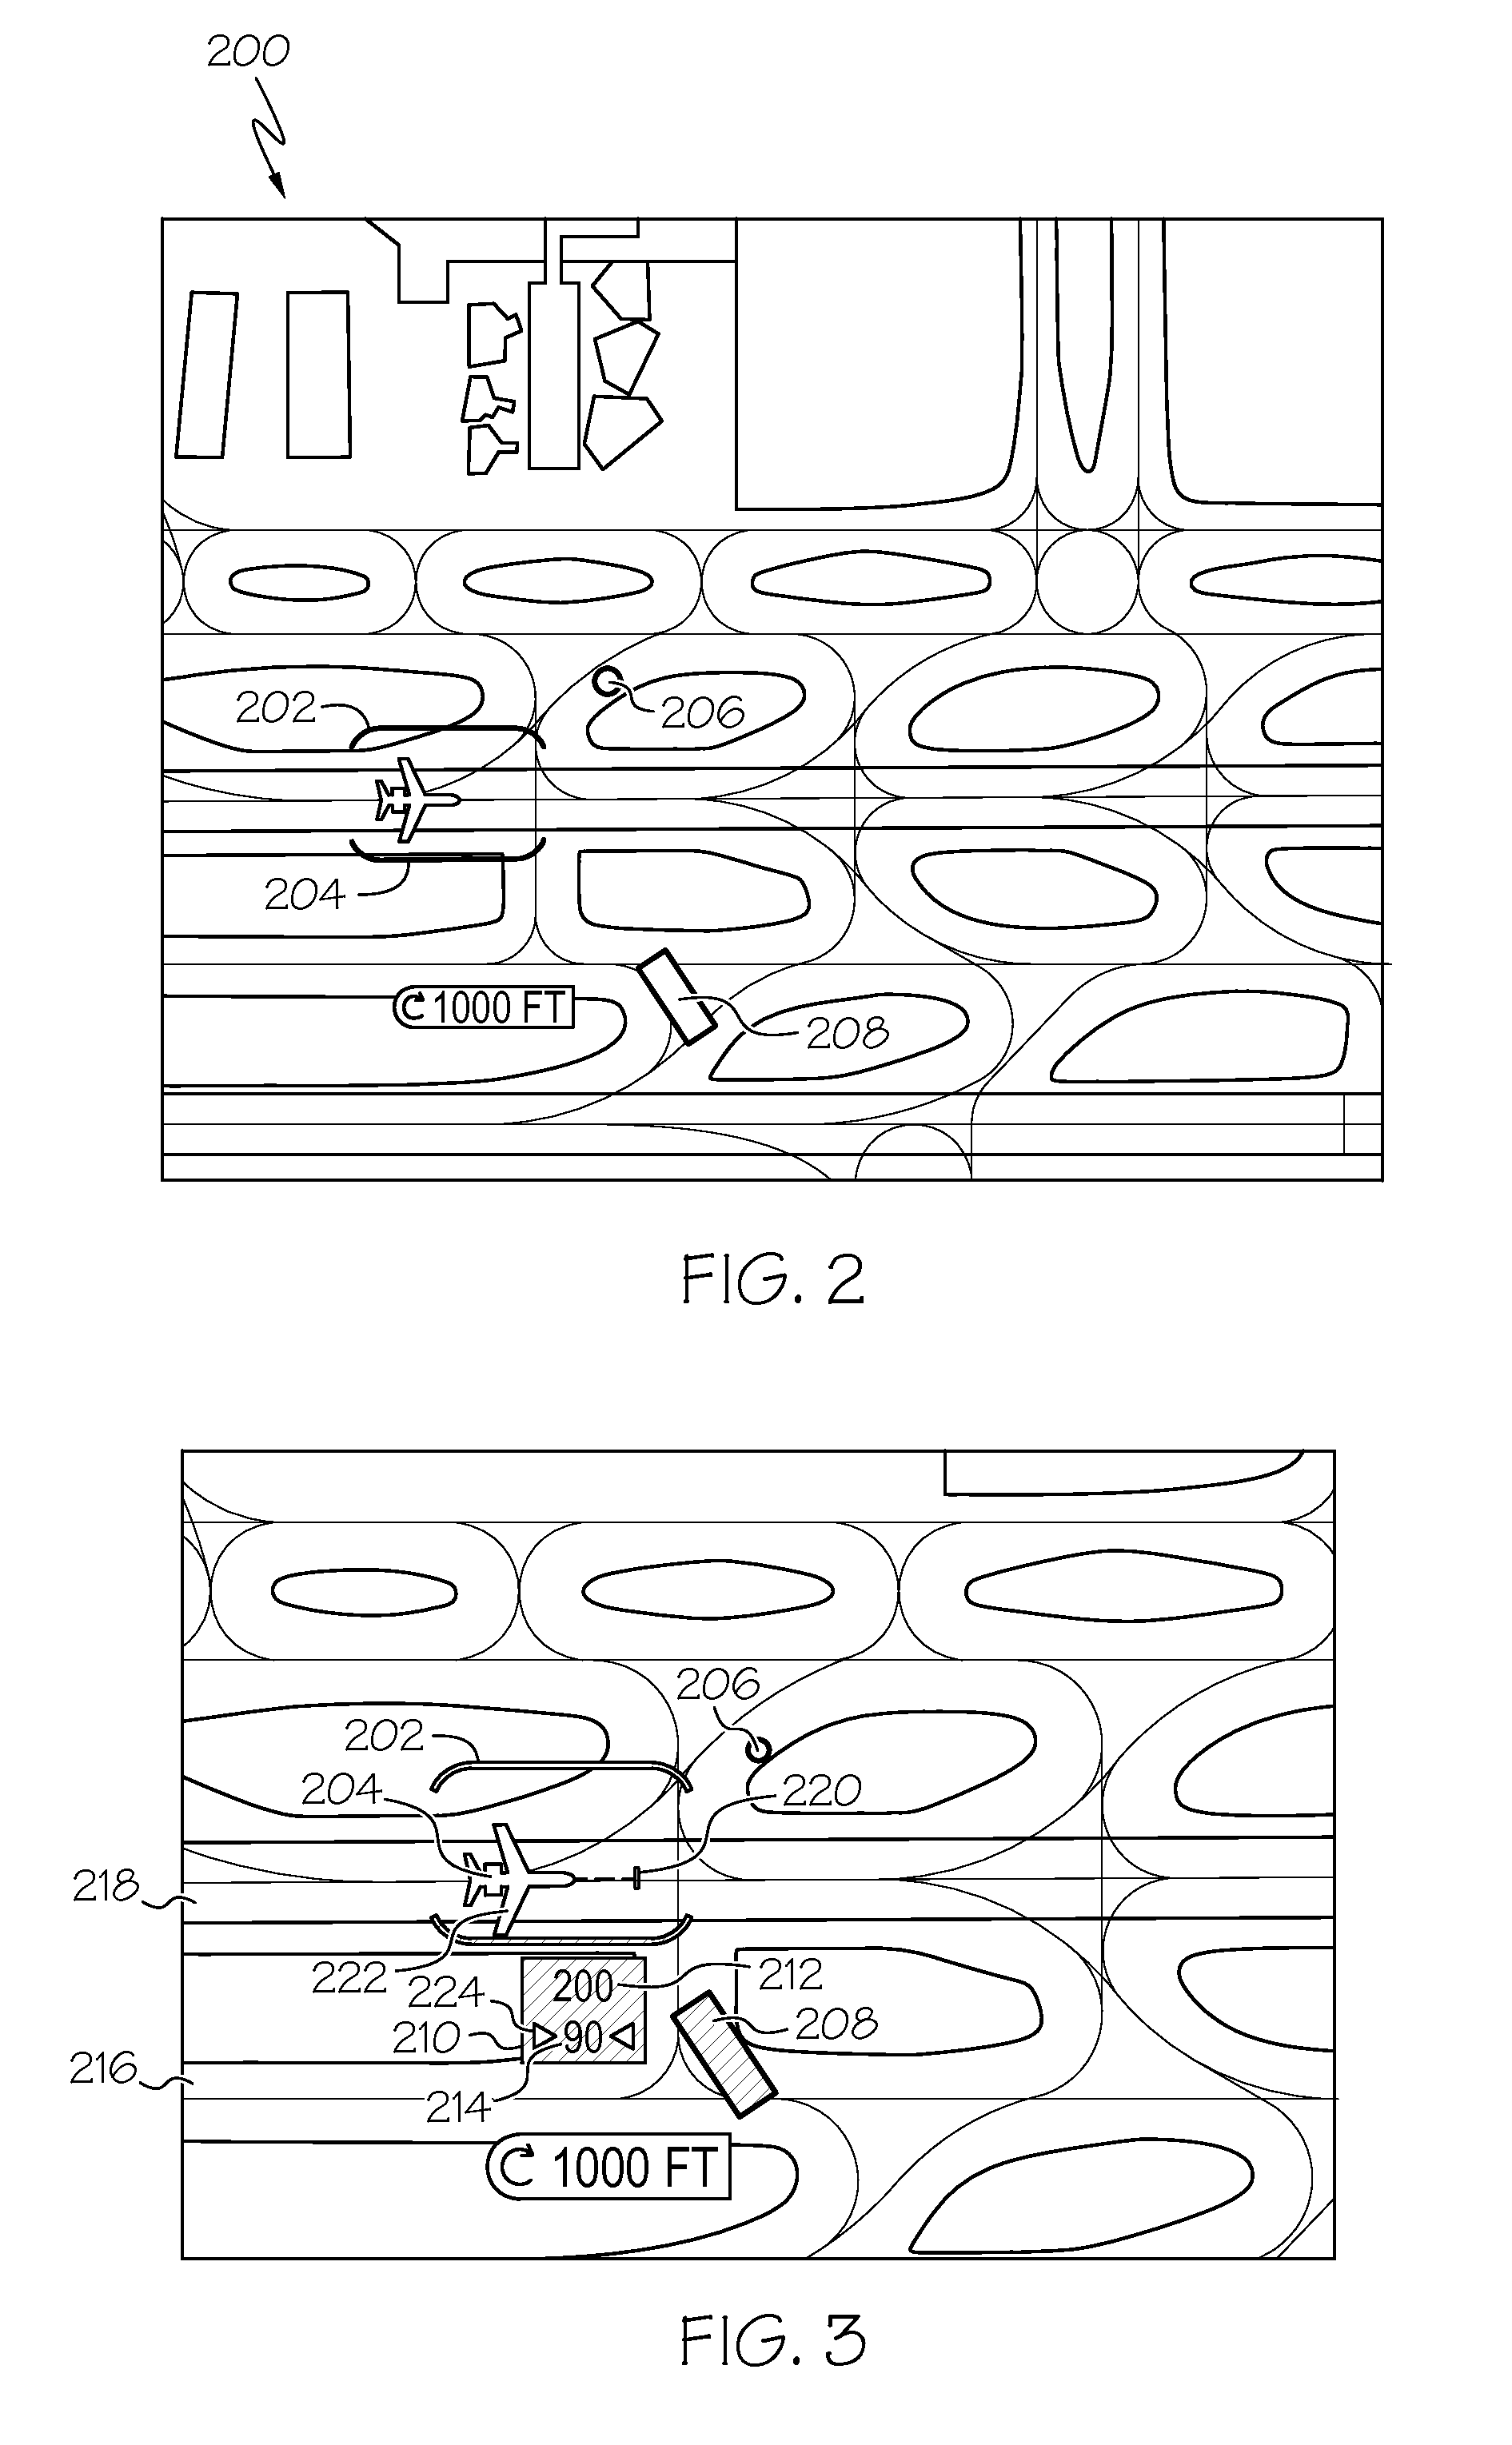 System and method for highlighting an area encompassing an aircraft that is free of hazards